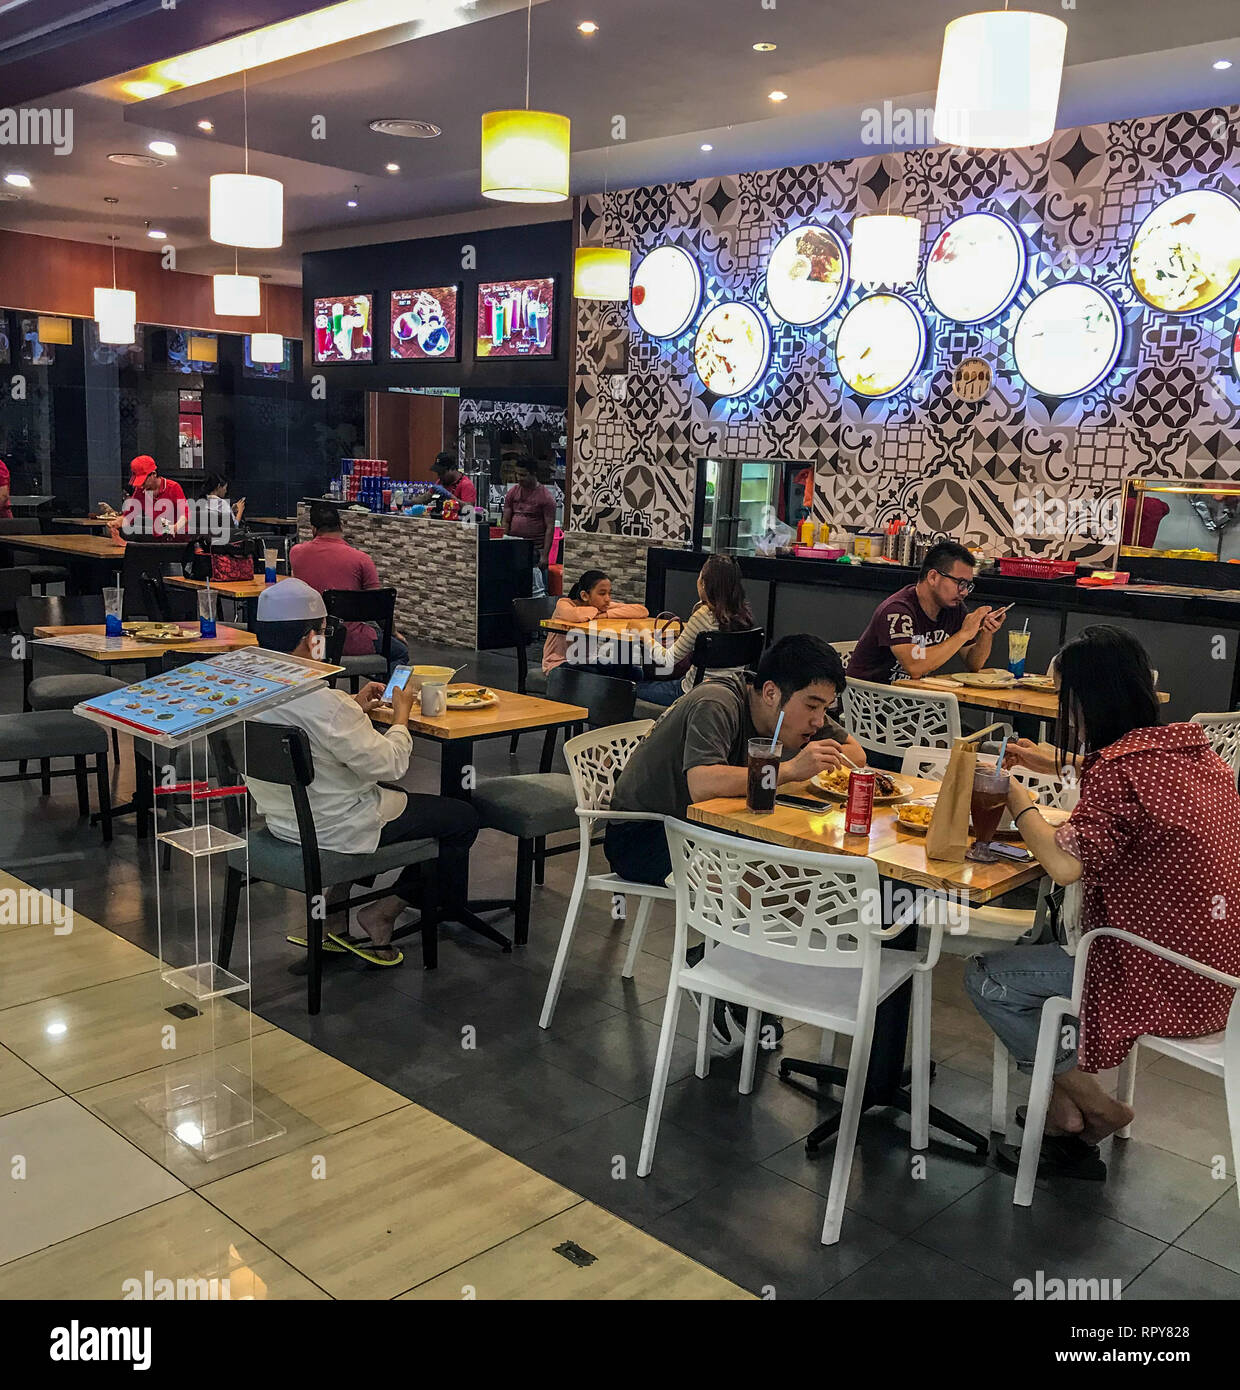 Malaysians Eating in a Small Restaurant in a Shopping Mall, Melaka, Malaysia. Stock Photo